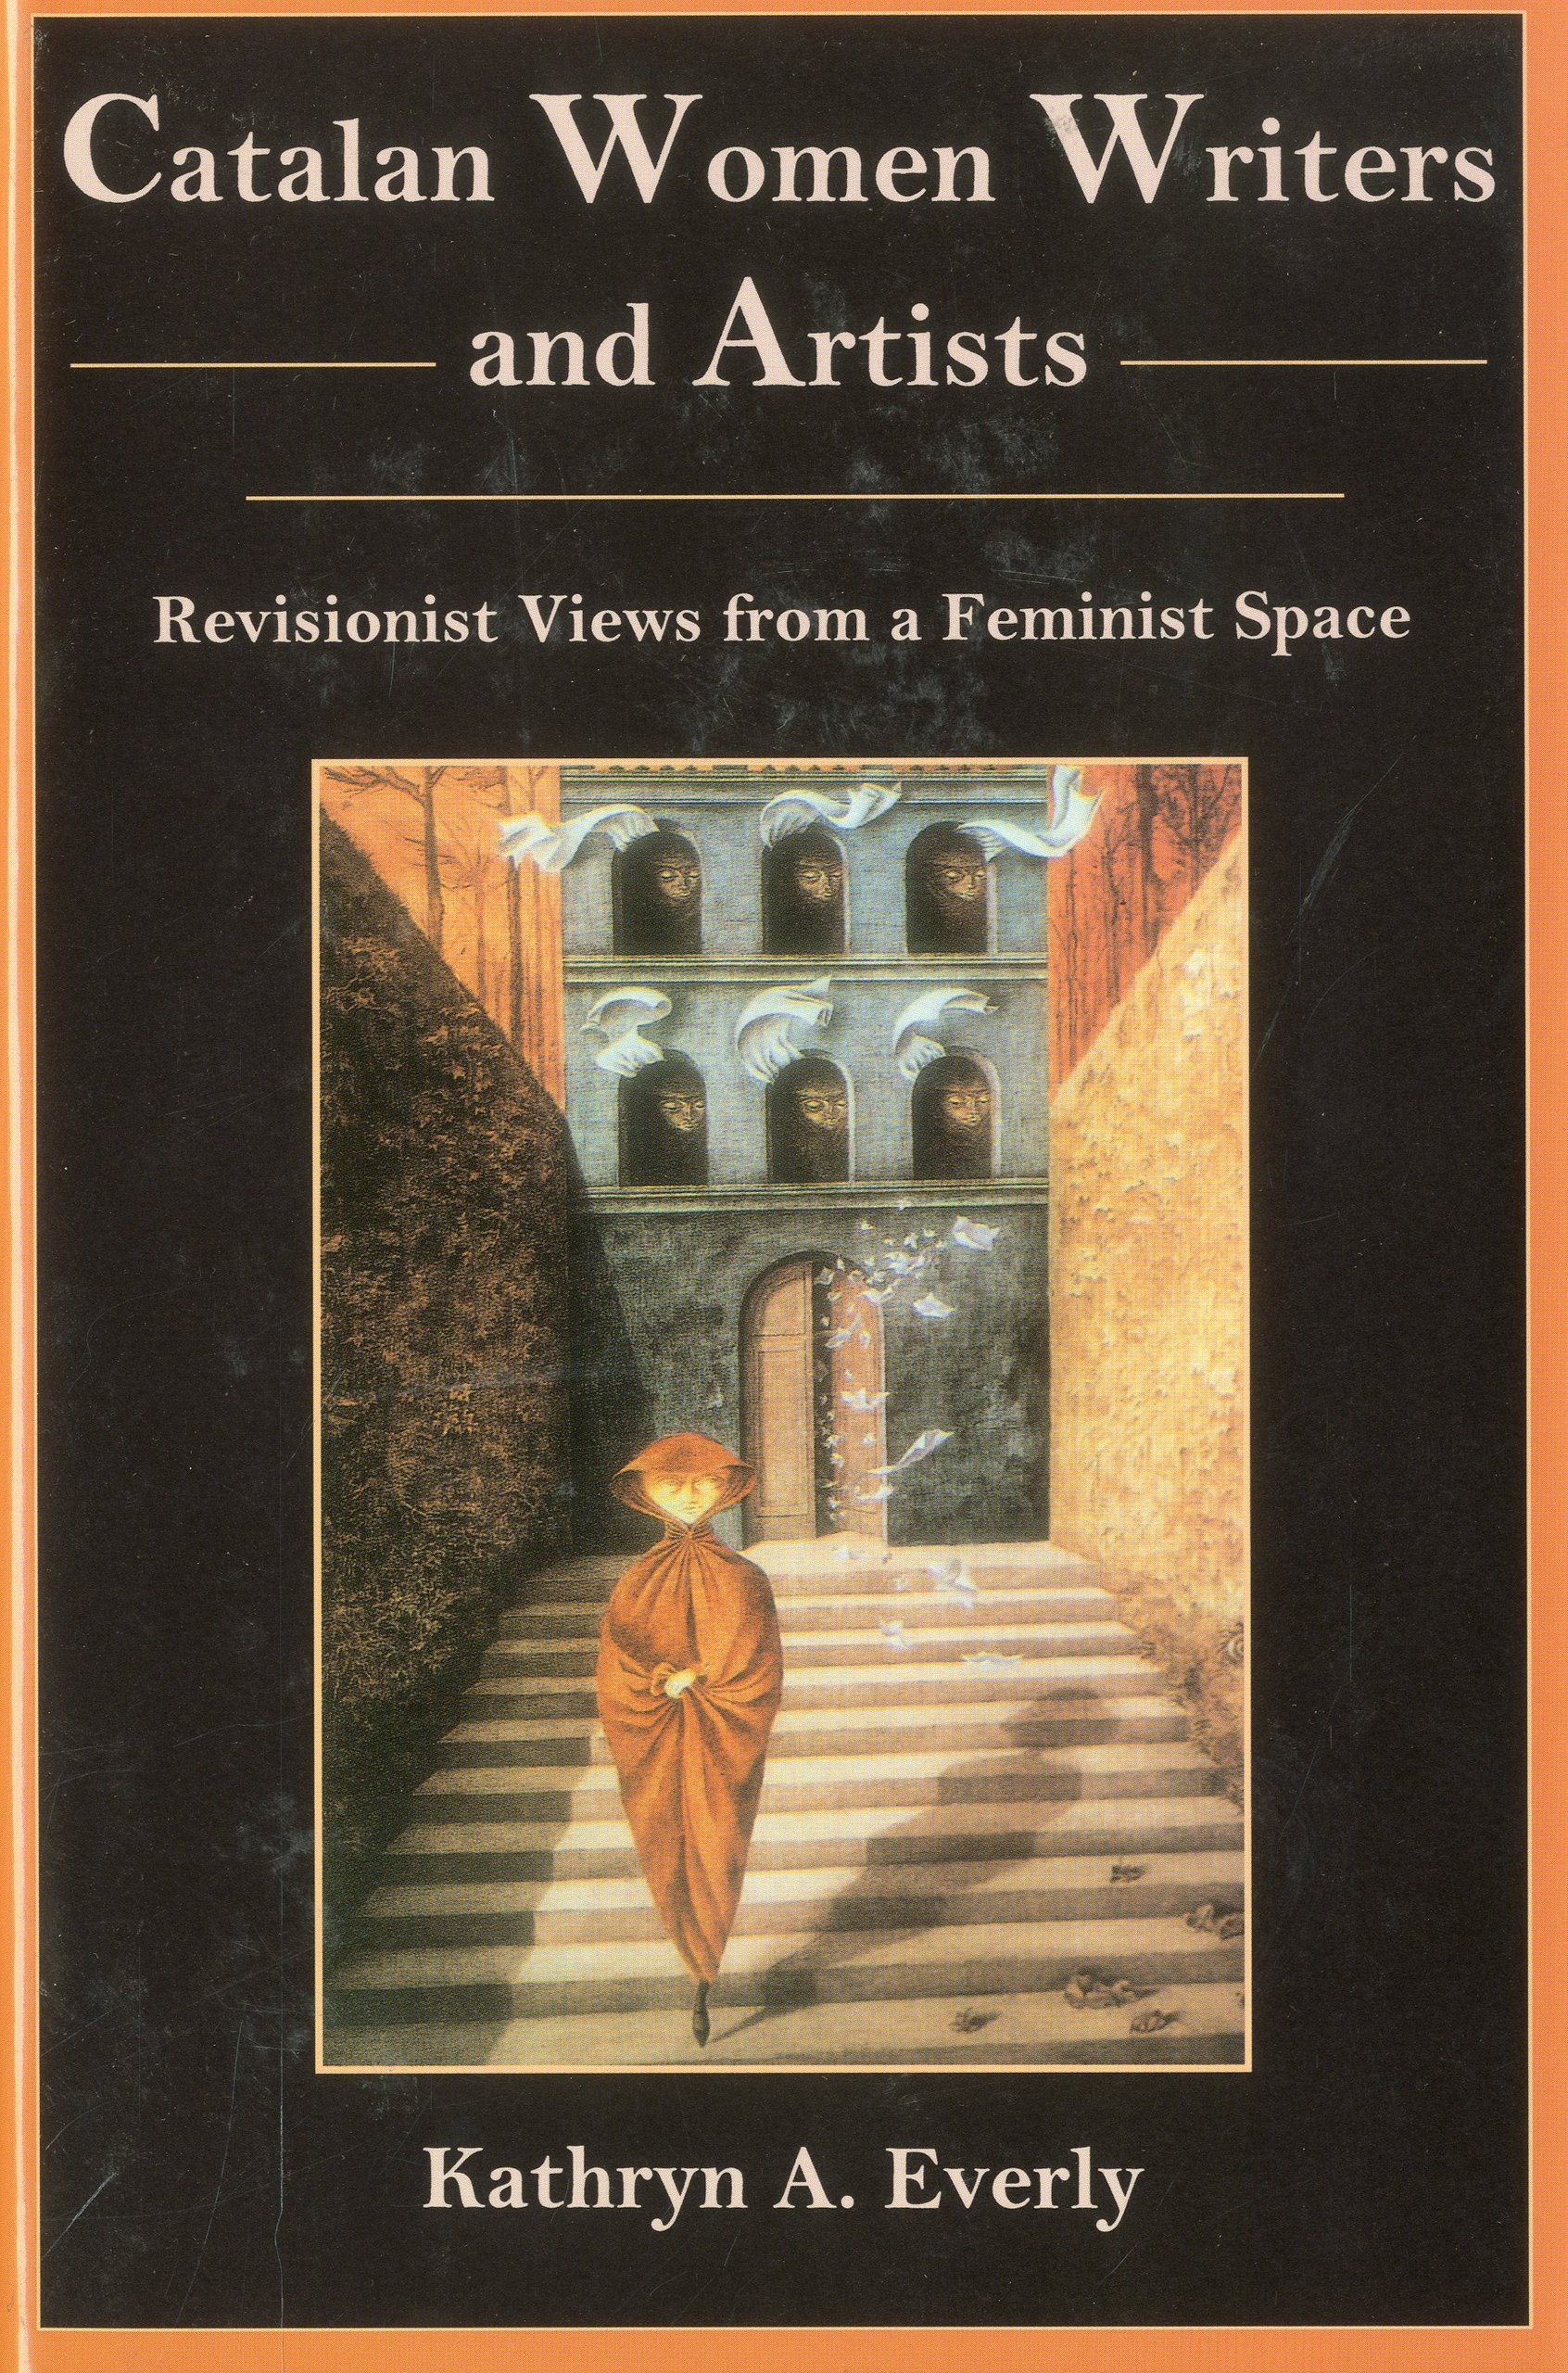 Catalan Women Writers and Artists: Revisionist Views from a Feminist Space